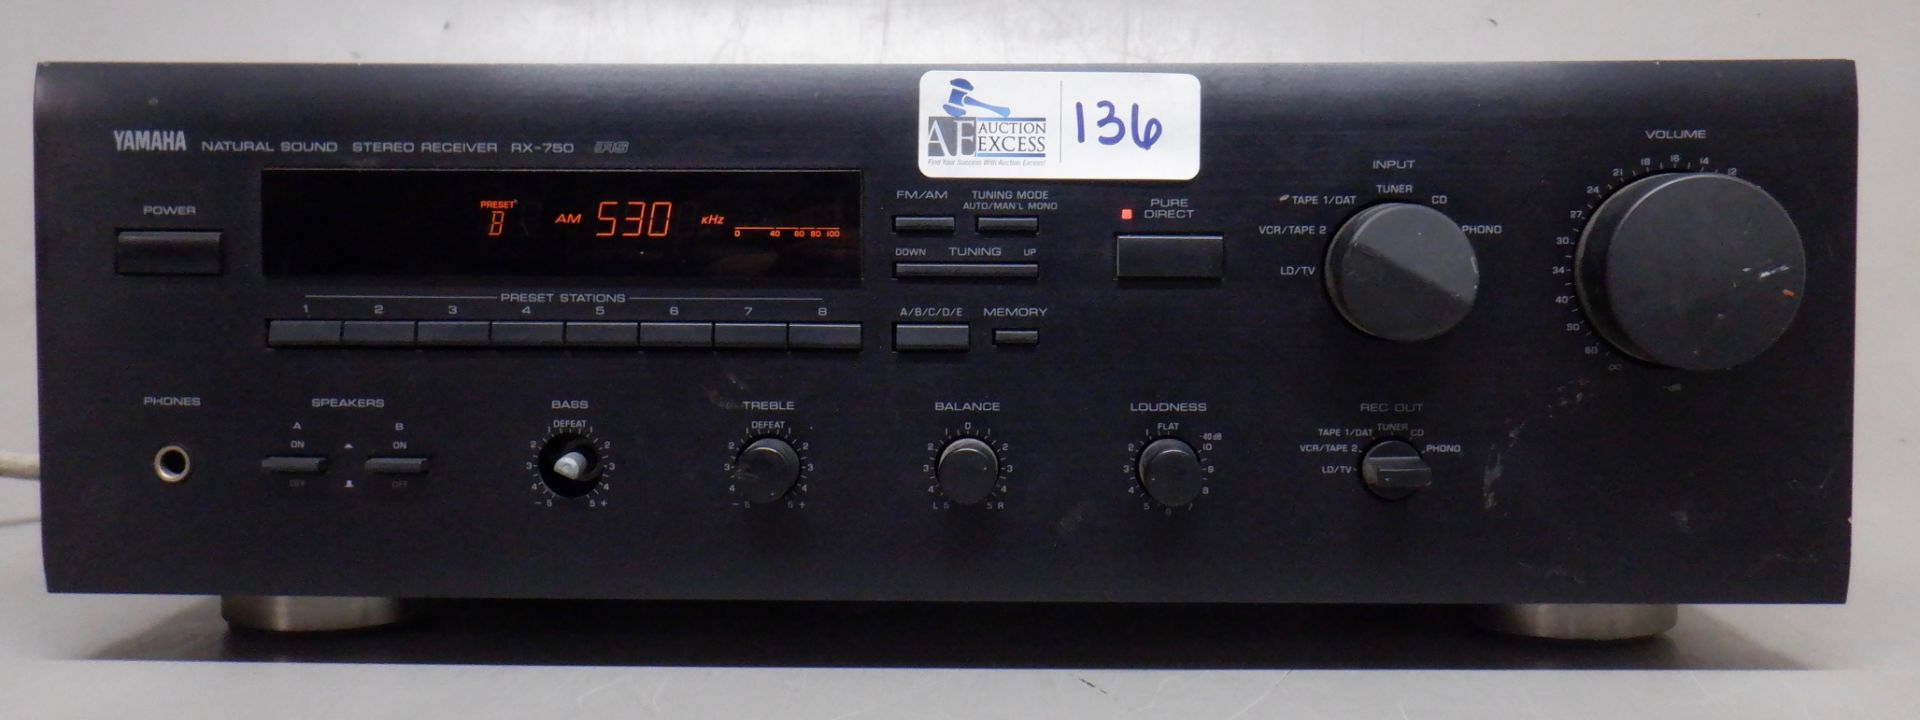 YAMAHA RX-750 STEREO RECEIVER